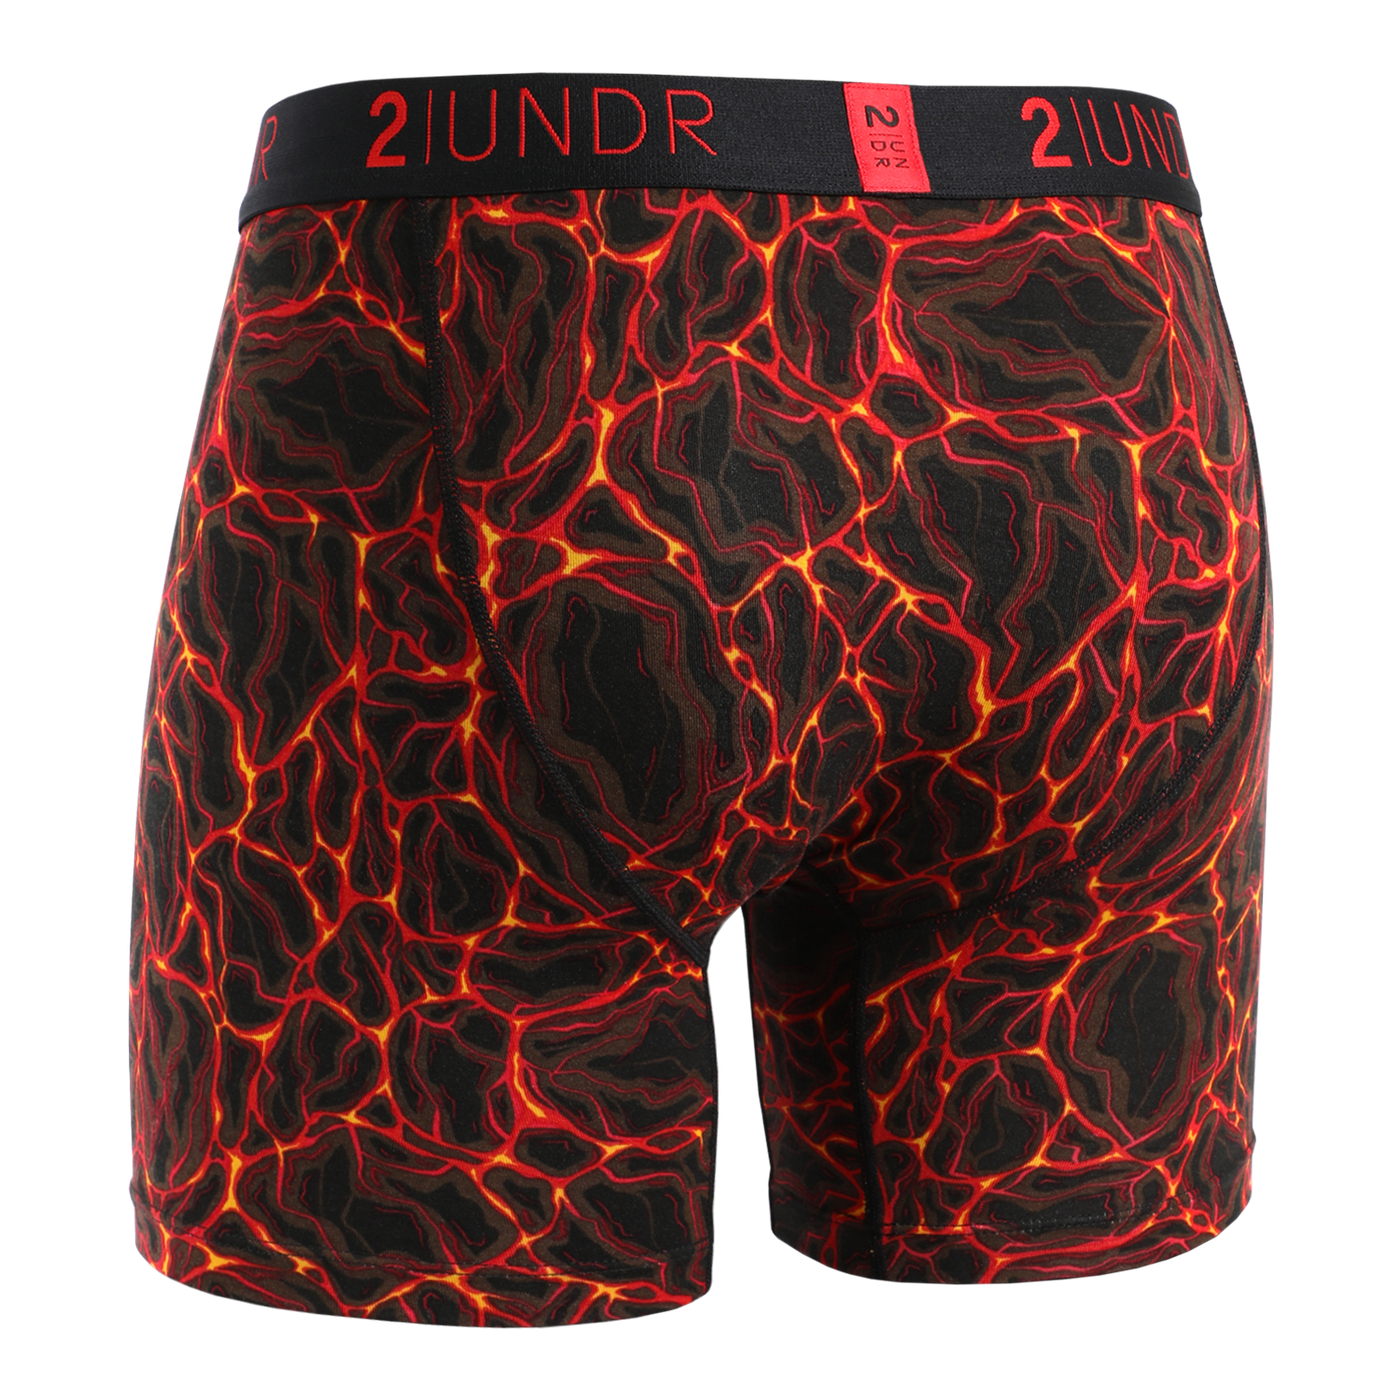 Swing Shift Boxer Brief  - Elements Collection - 3 Pack